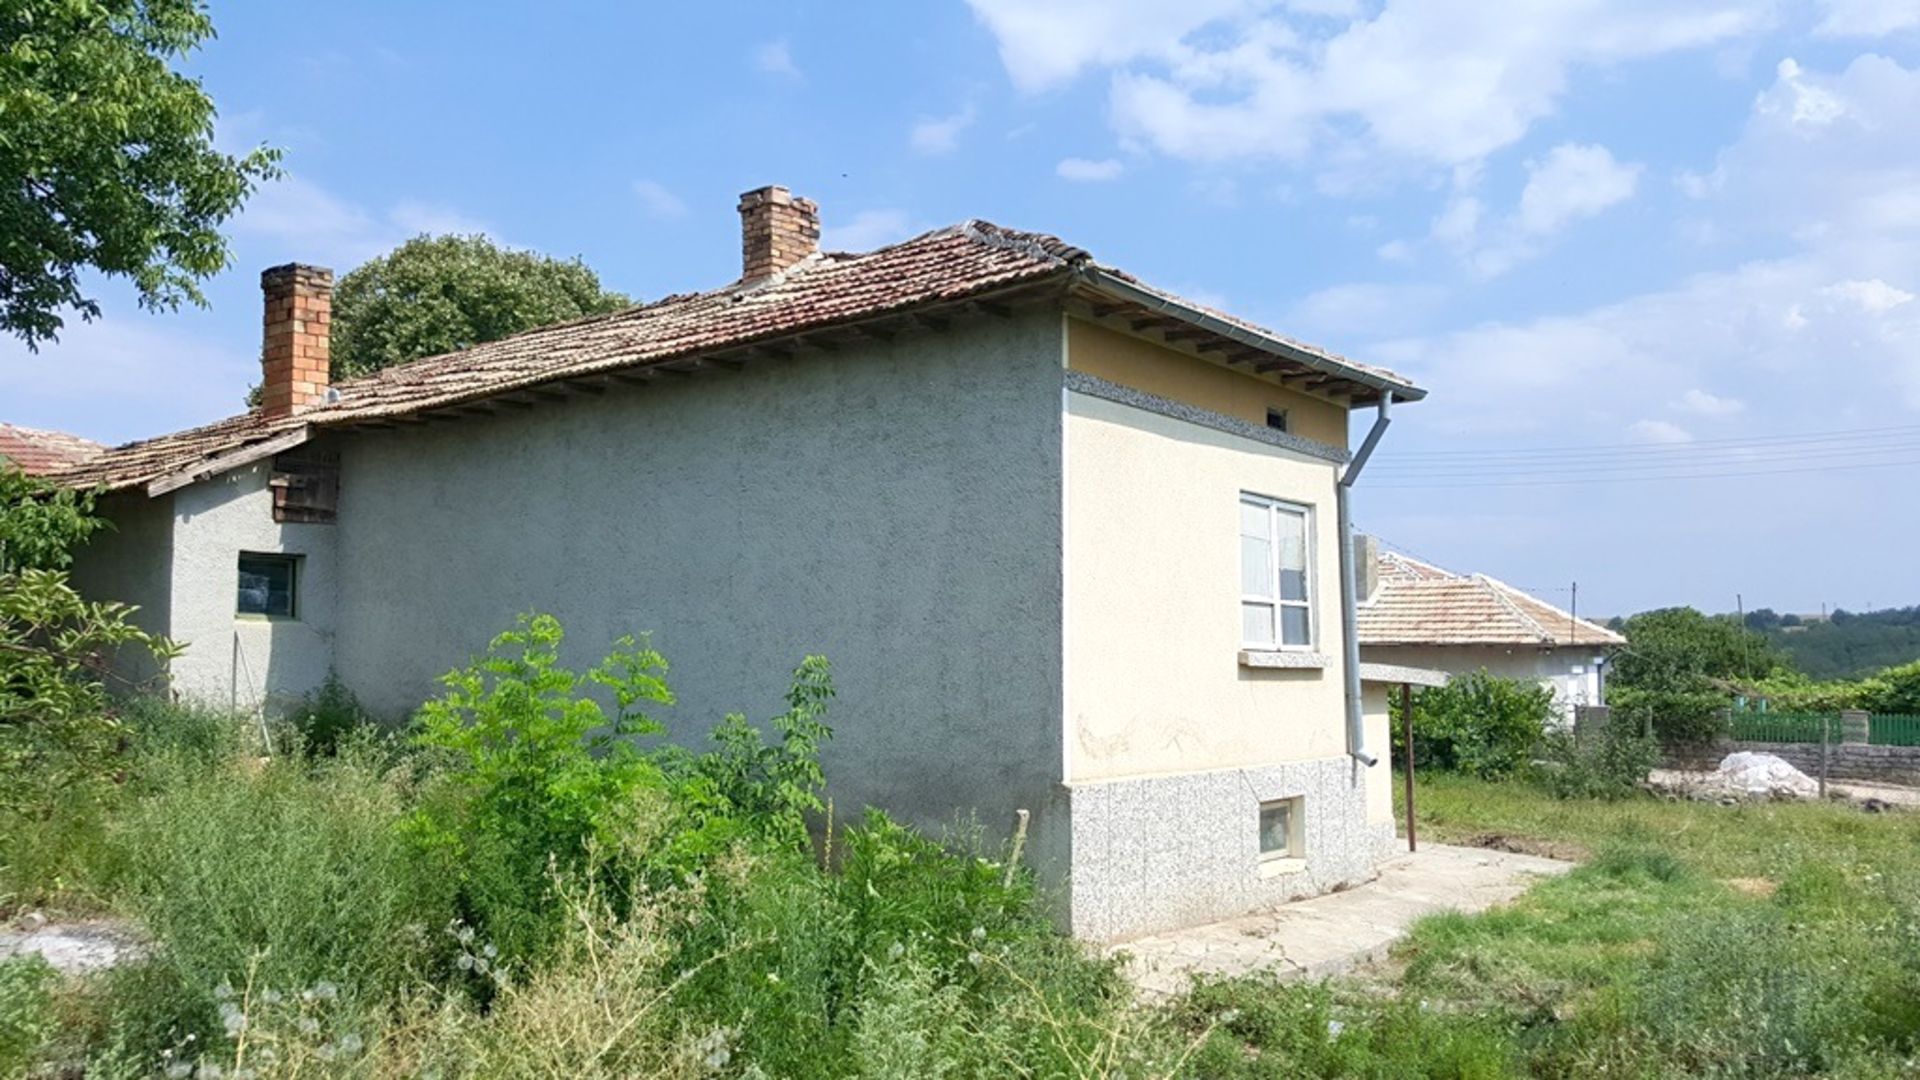 Sunny Bulgarian cottage 30 miles from beaches   Here is a great opportunity to snap up a well- - Image 3 of 26